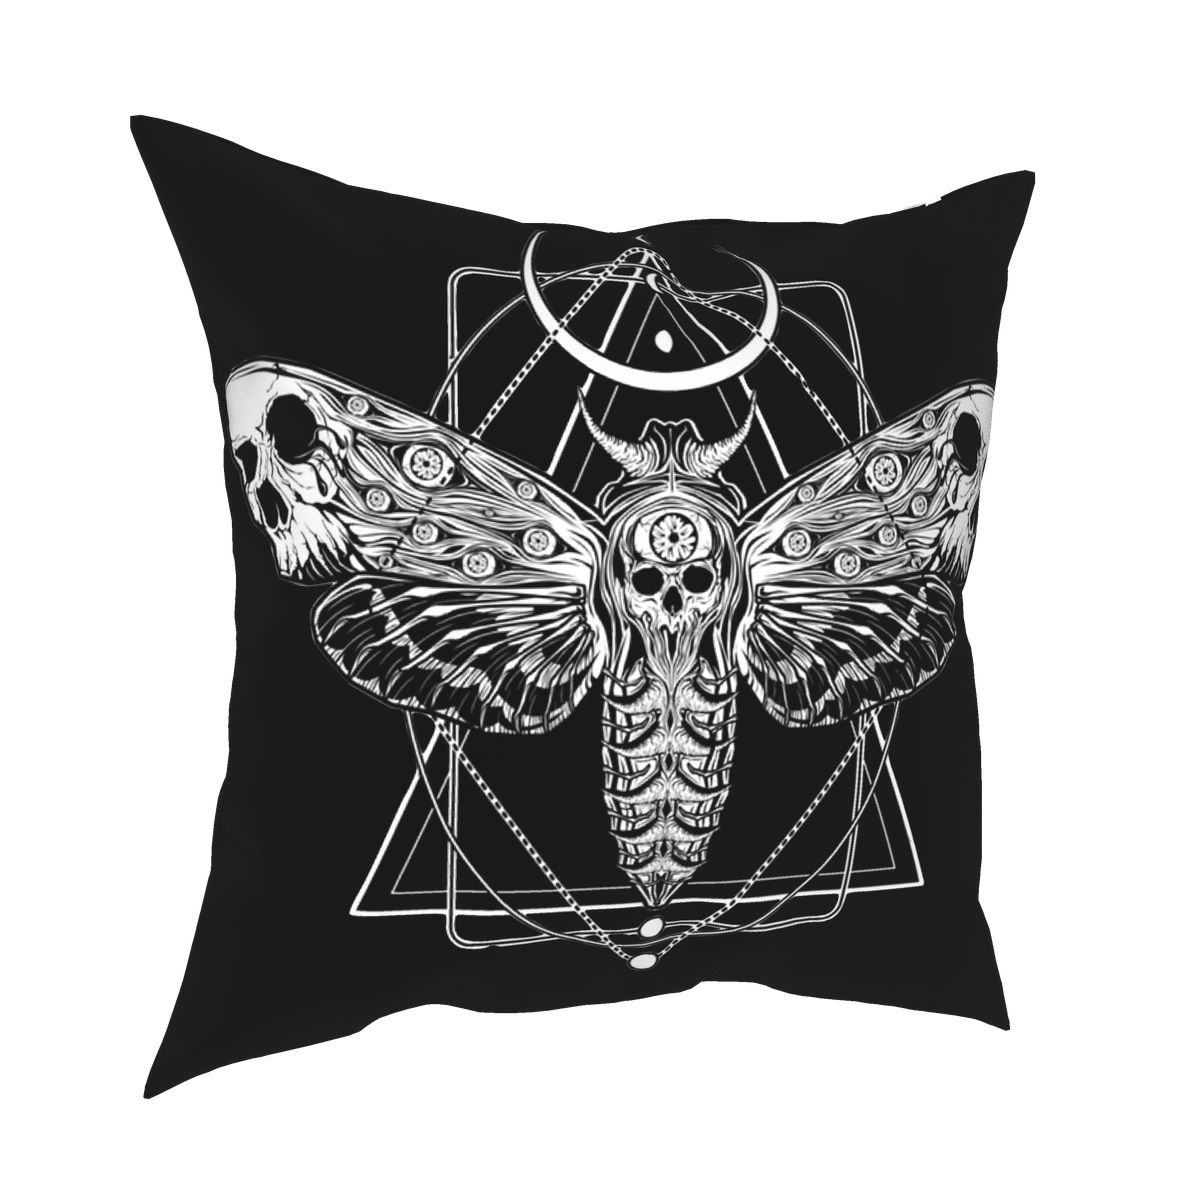 Surreal Pillow with Death Skeleton Skull / Cushion with Decoration Double-sided Printing - HARD'N'HEAVY